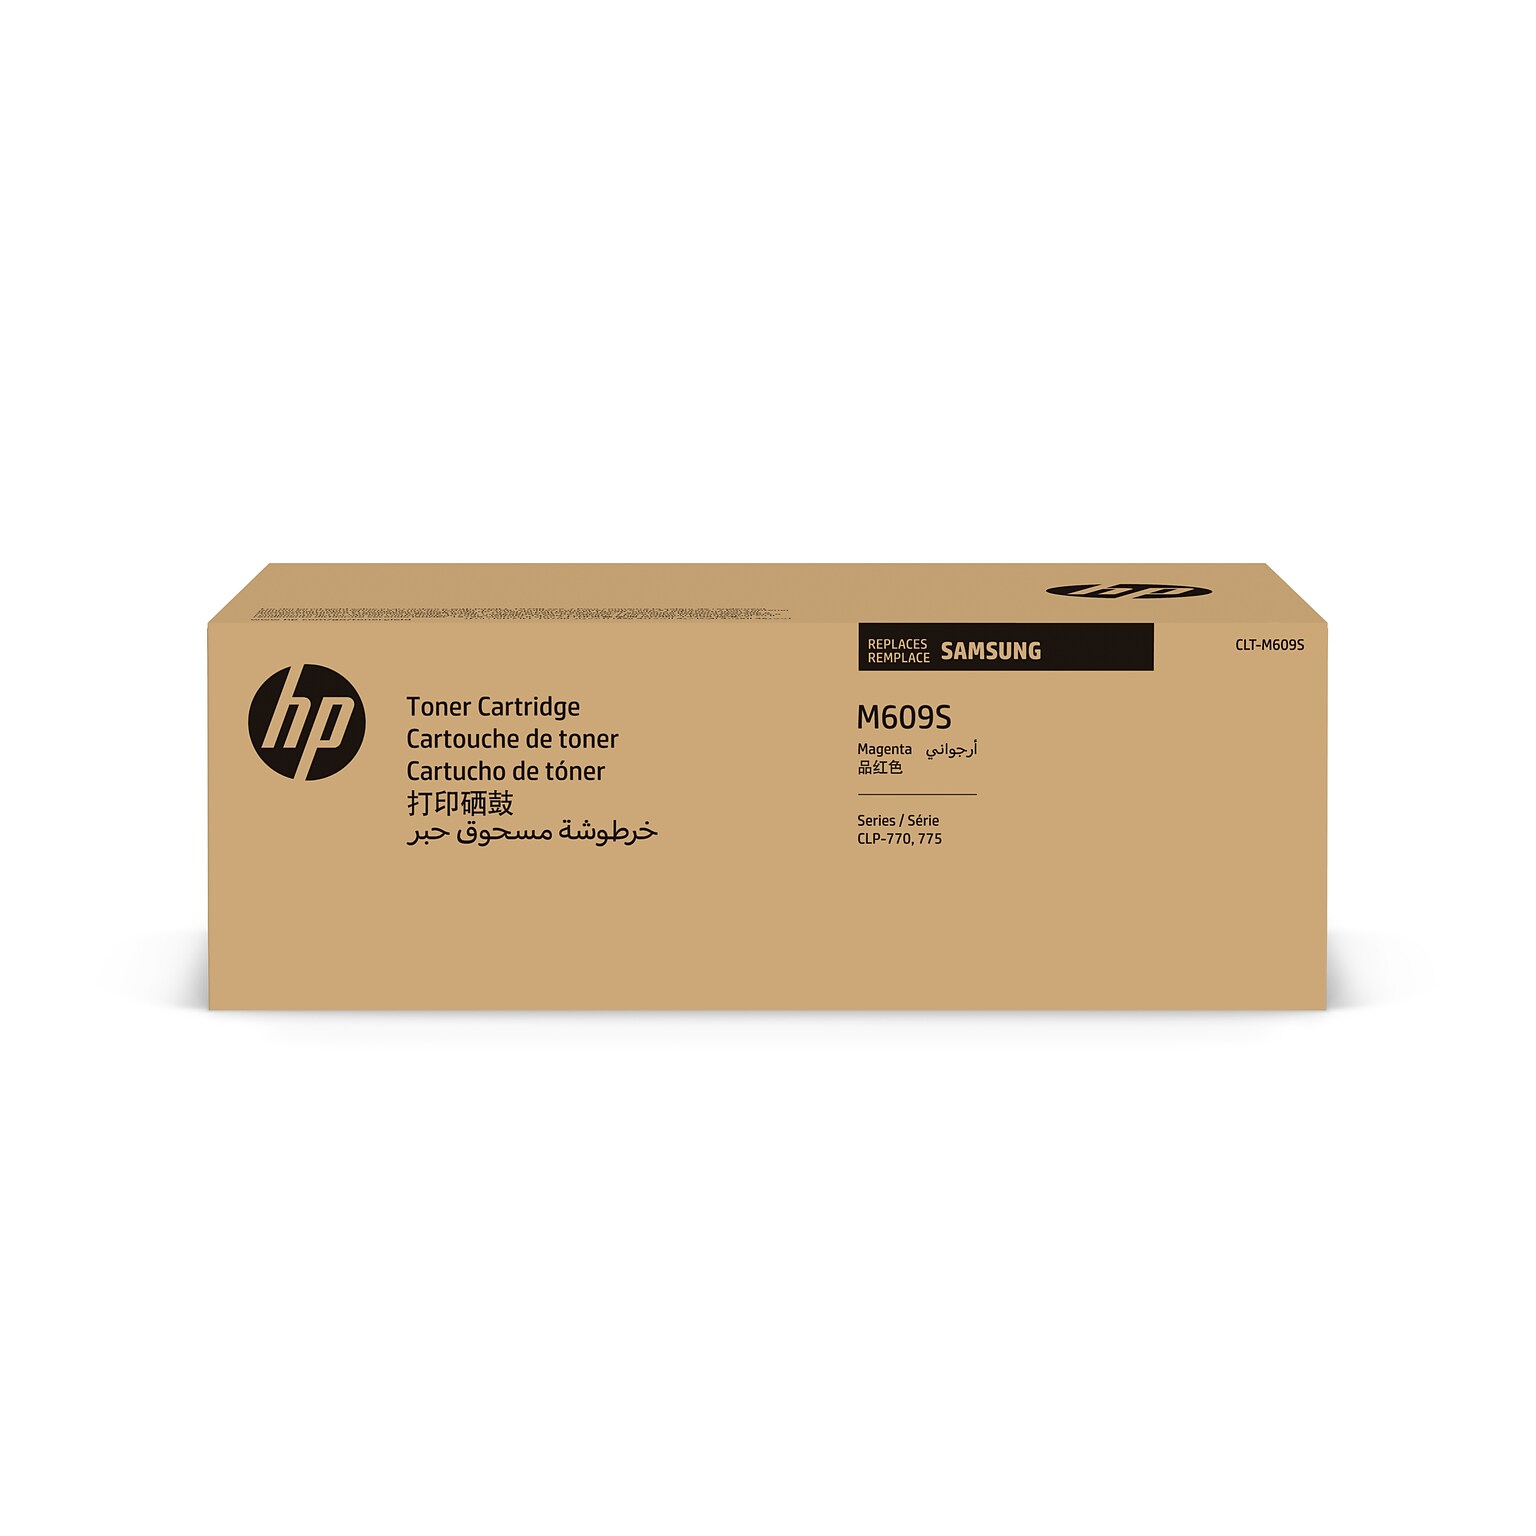 HP M609S Magenta Toner Cartridge for Samsung CLT-M609S (SU352), Samsung-branded printer supplies are now HP-branded